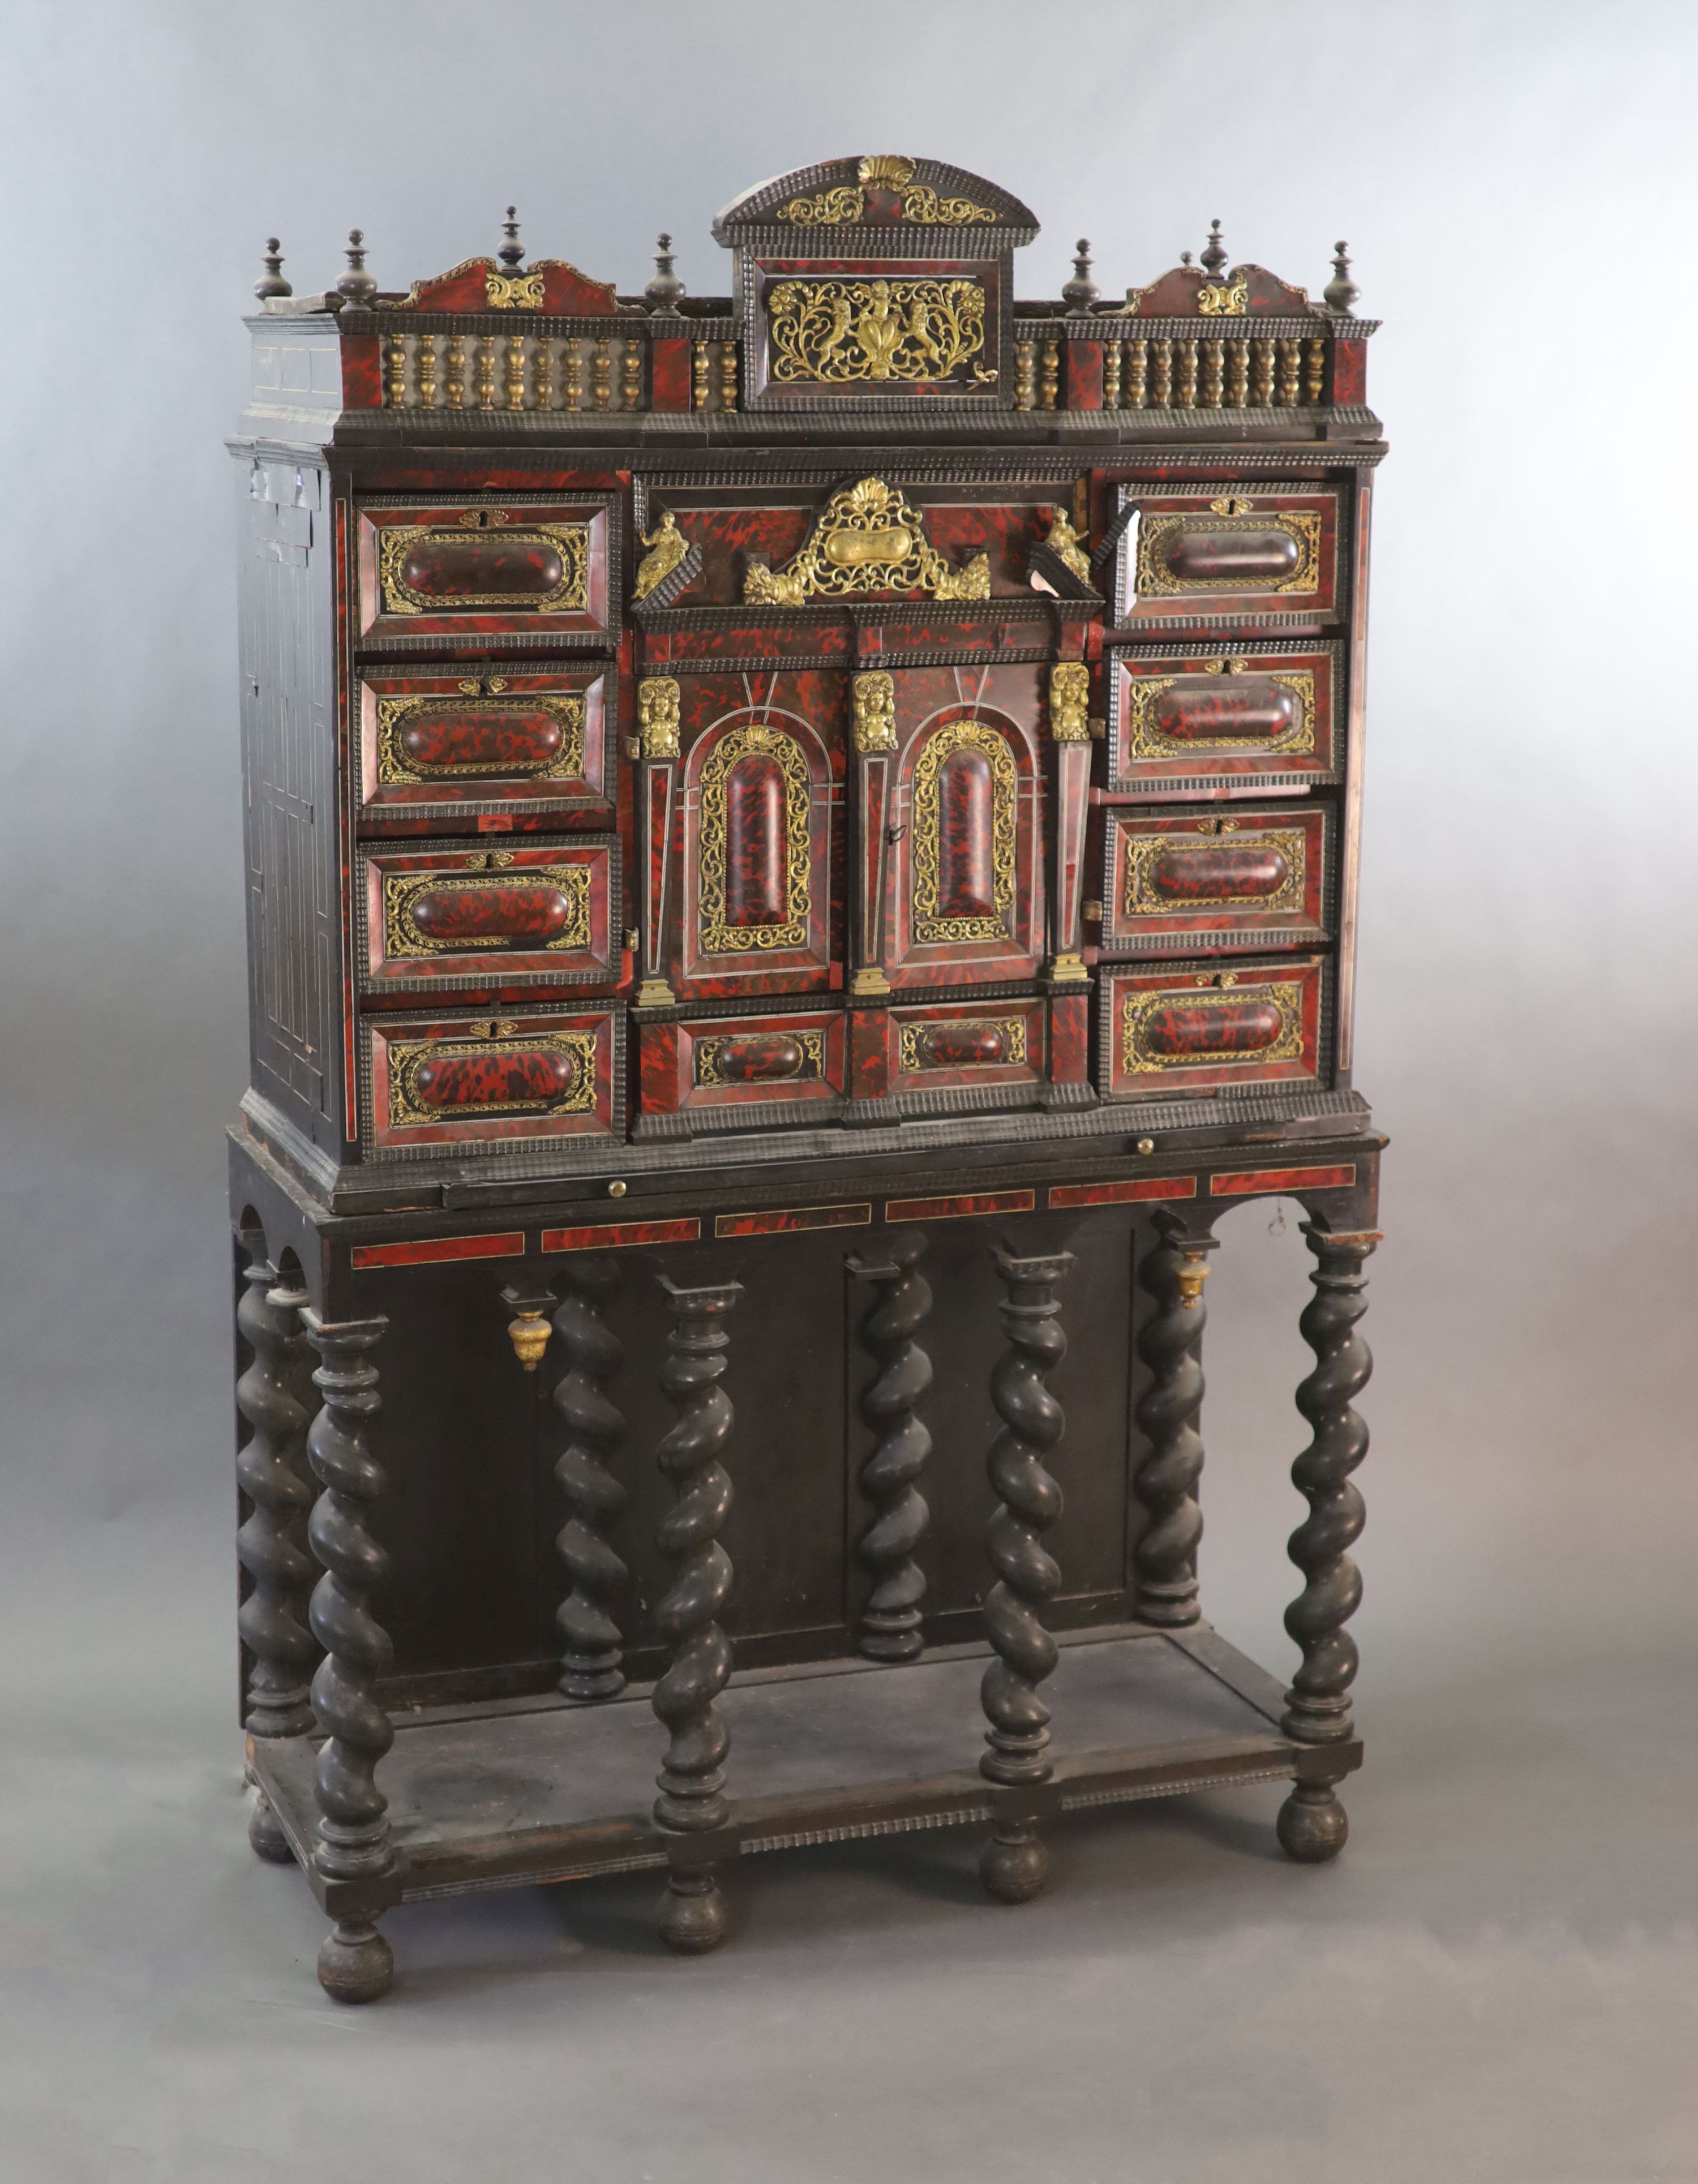 A late 17th century Portuguese ormolu mounted ebony and red tortoiseshell cabinet on stand, W.124cm D.46cm H.187cm